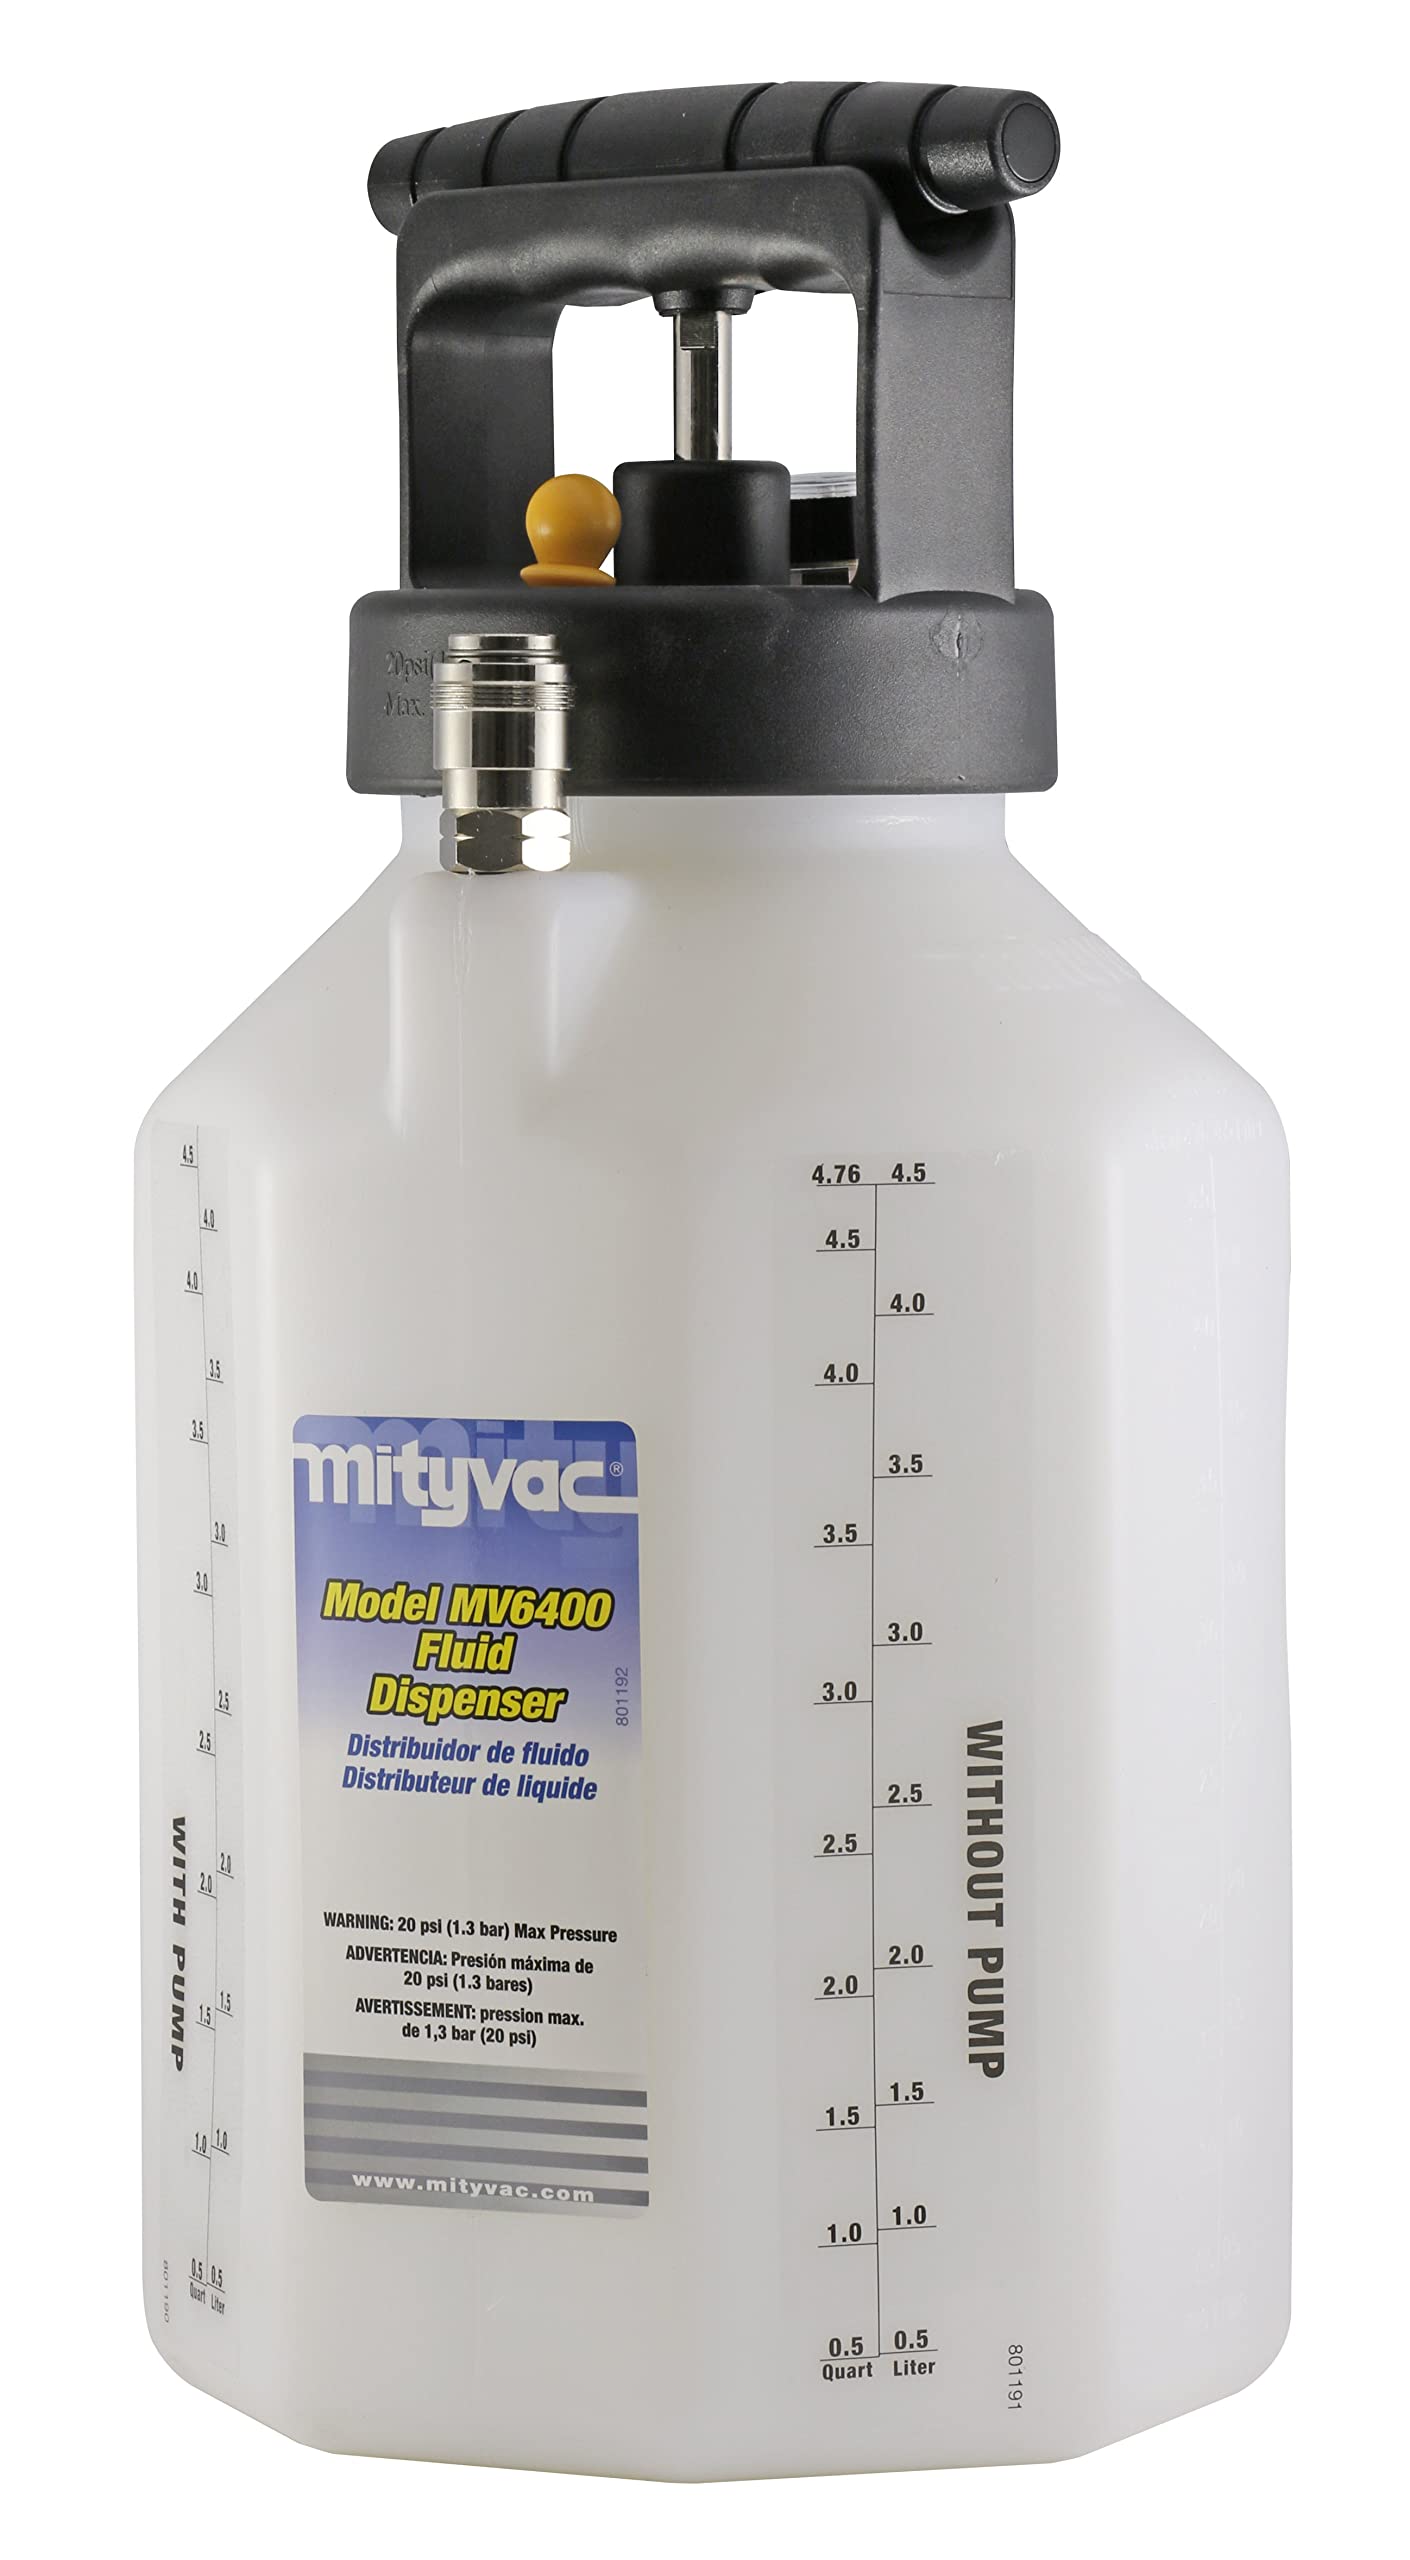 Mityvac MV6400 1 Gallon Fluid Dispensing System for Topping Off Fluid Reservoirs, Master Cylinders Includes 5 ft. Hose with Wand